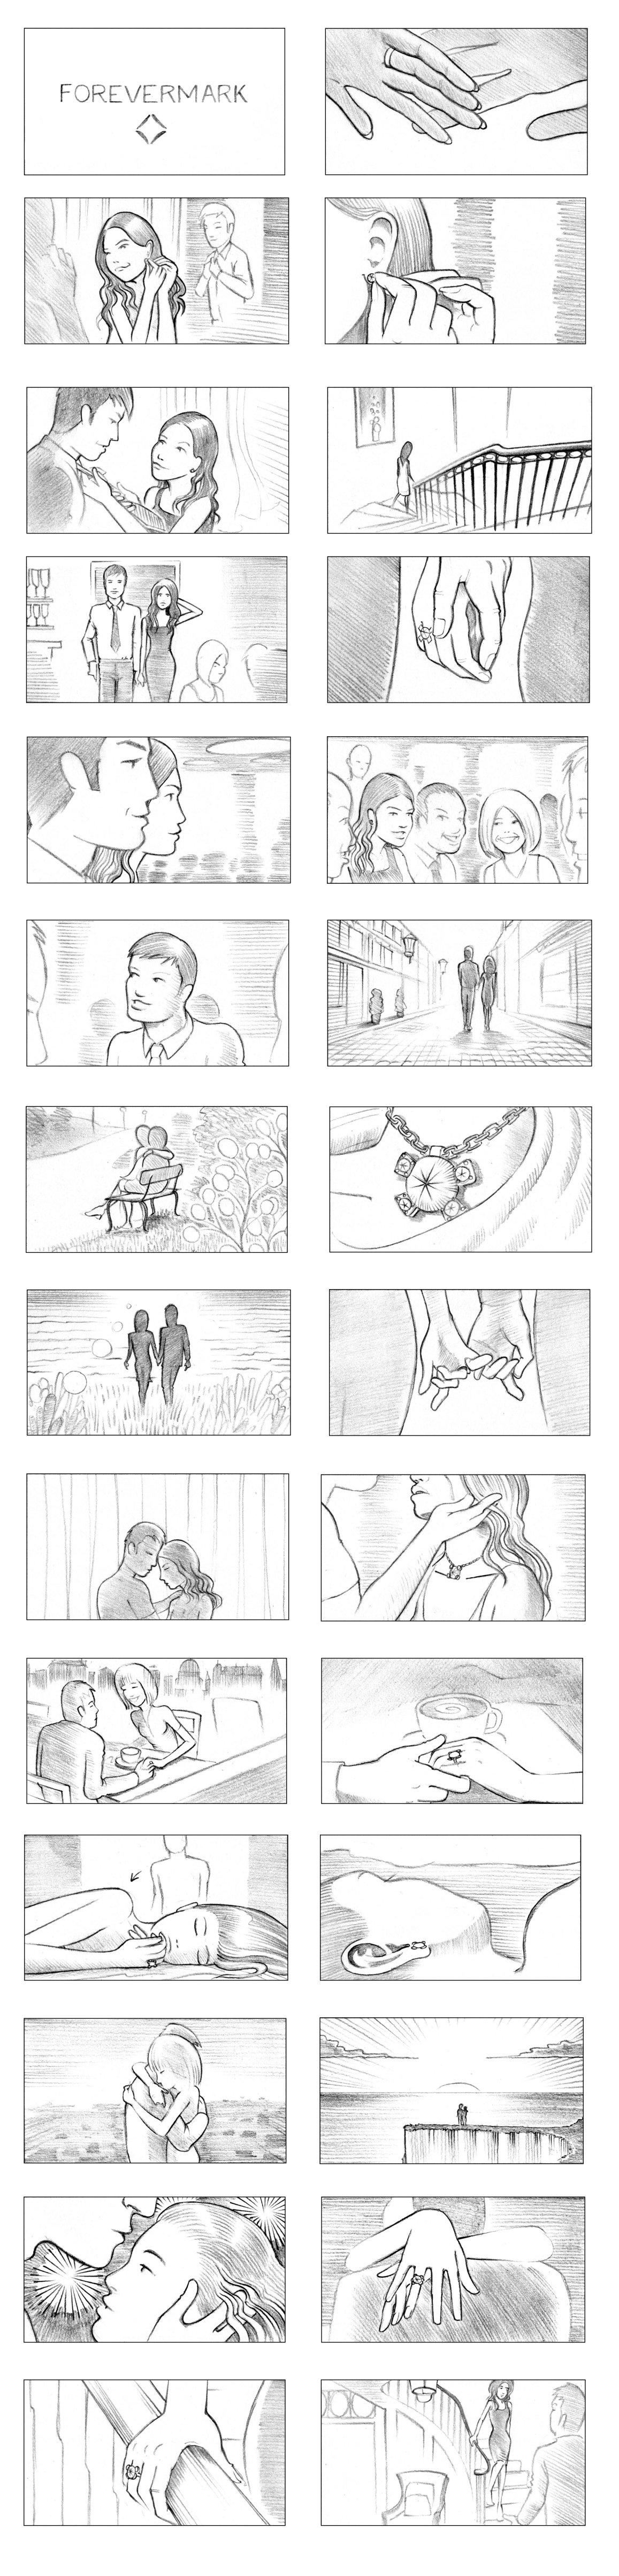 FOREVERMARK STORYBOARD BY ANDY SPARROW